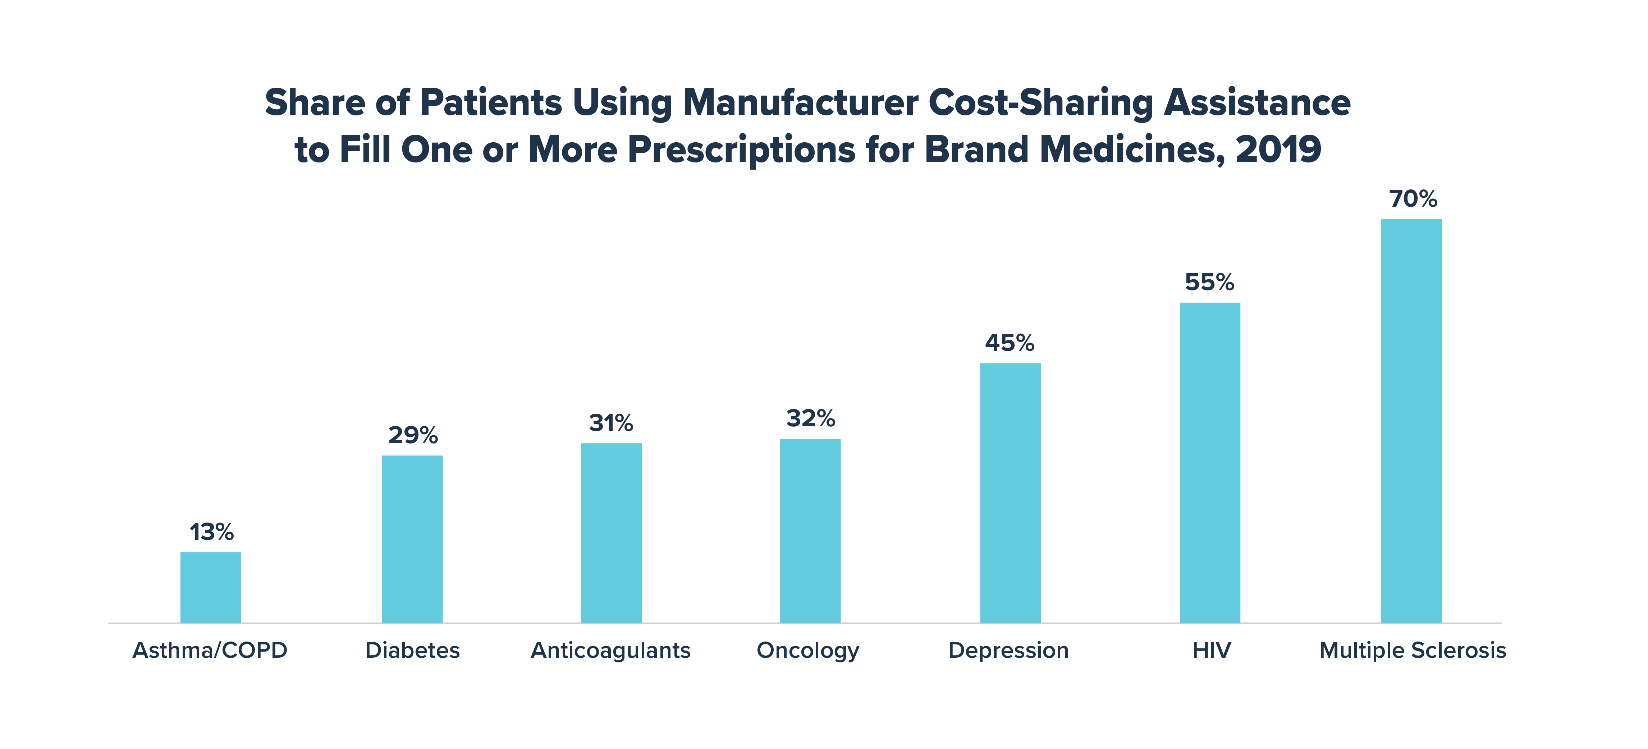 Share of Patients Using Manufacturer Cost-Sharing Assistance to Fill One or More Prescriptions for Brand Medicines 2019